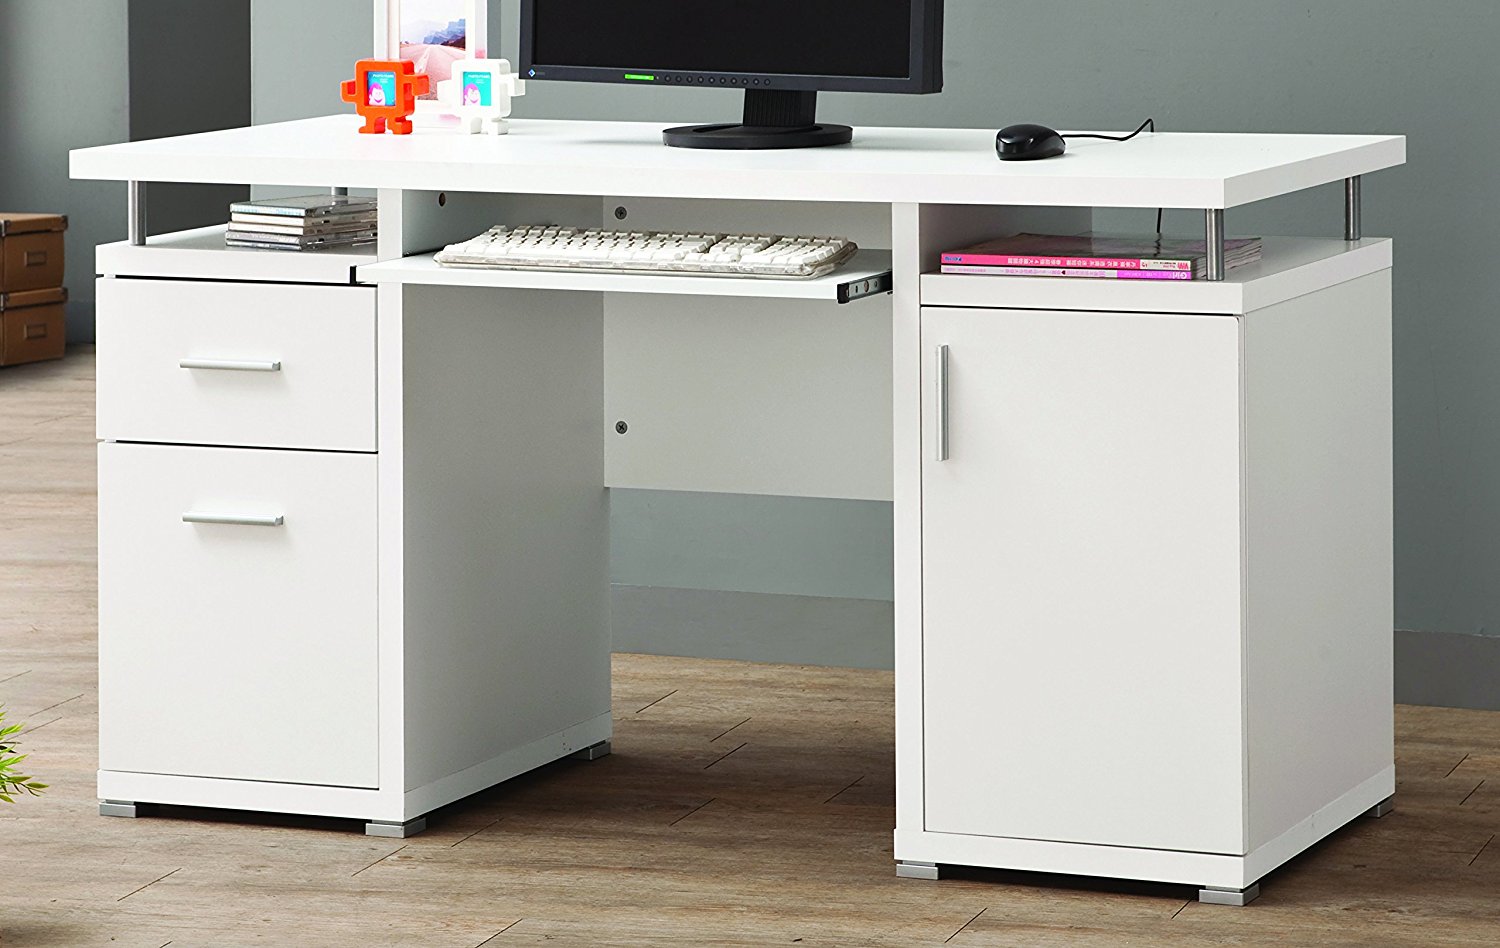 Desk with built-in drawers and cabinets